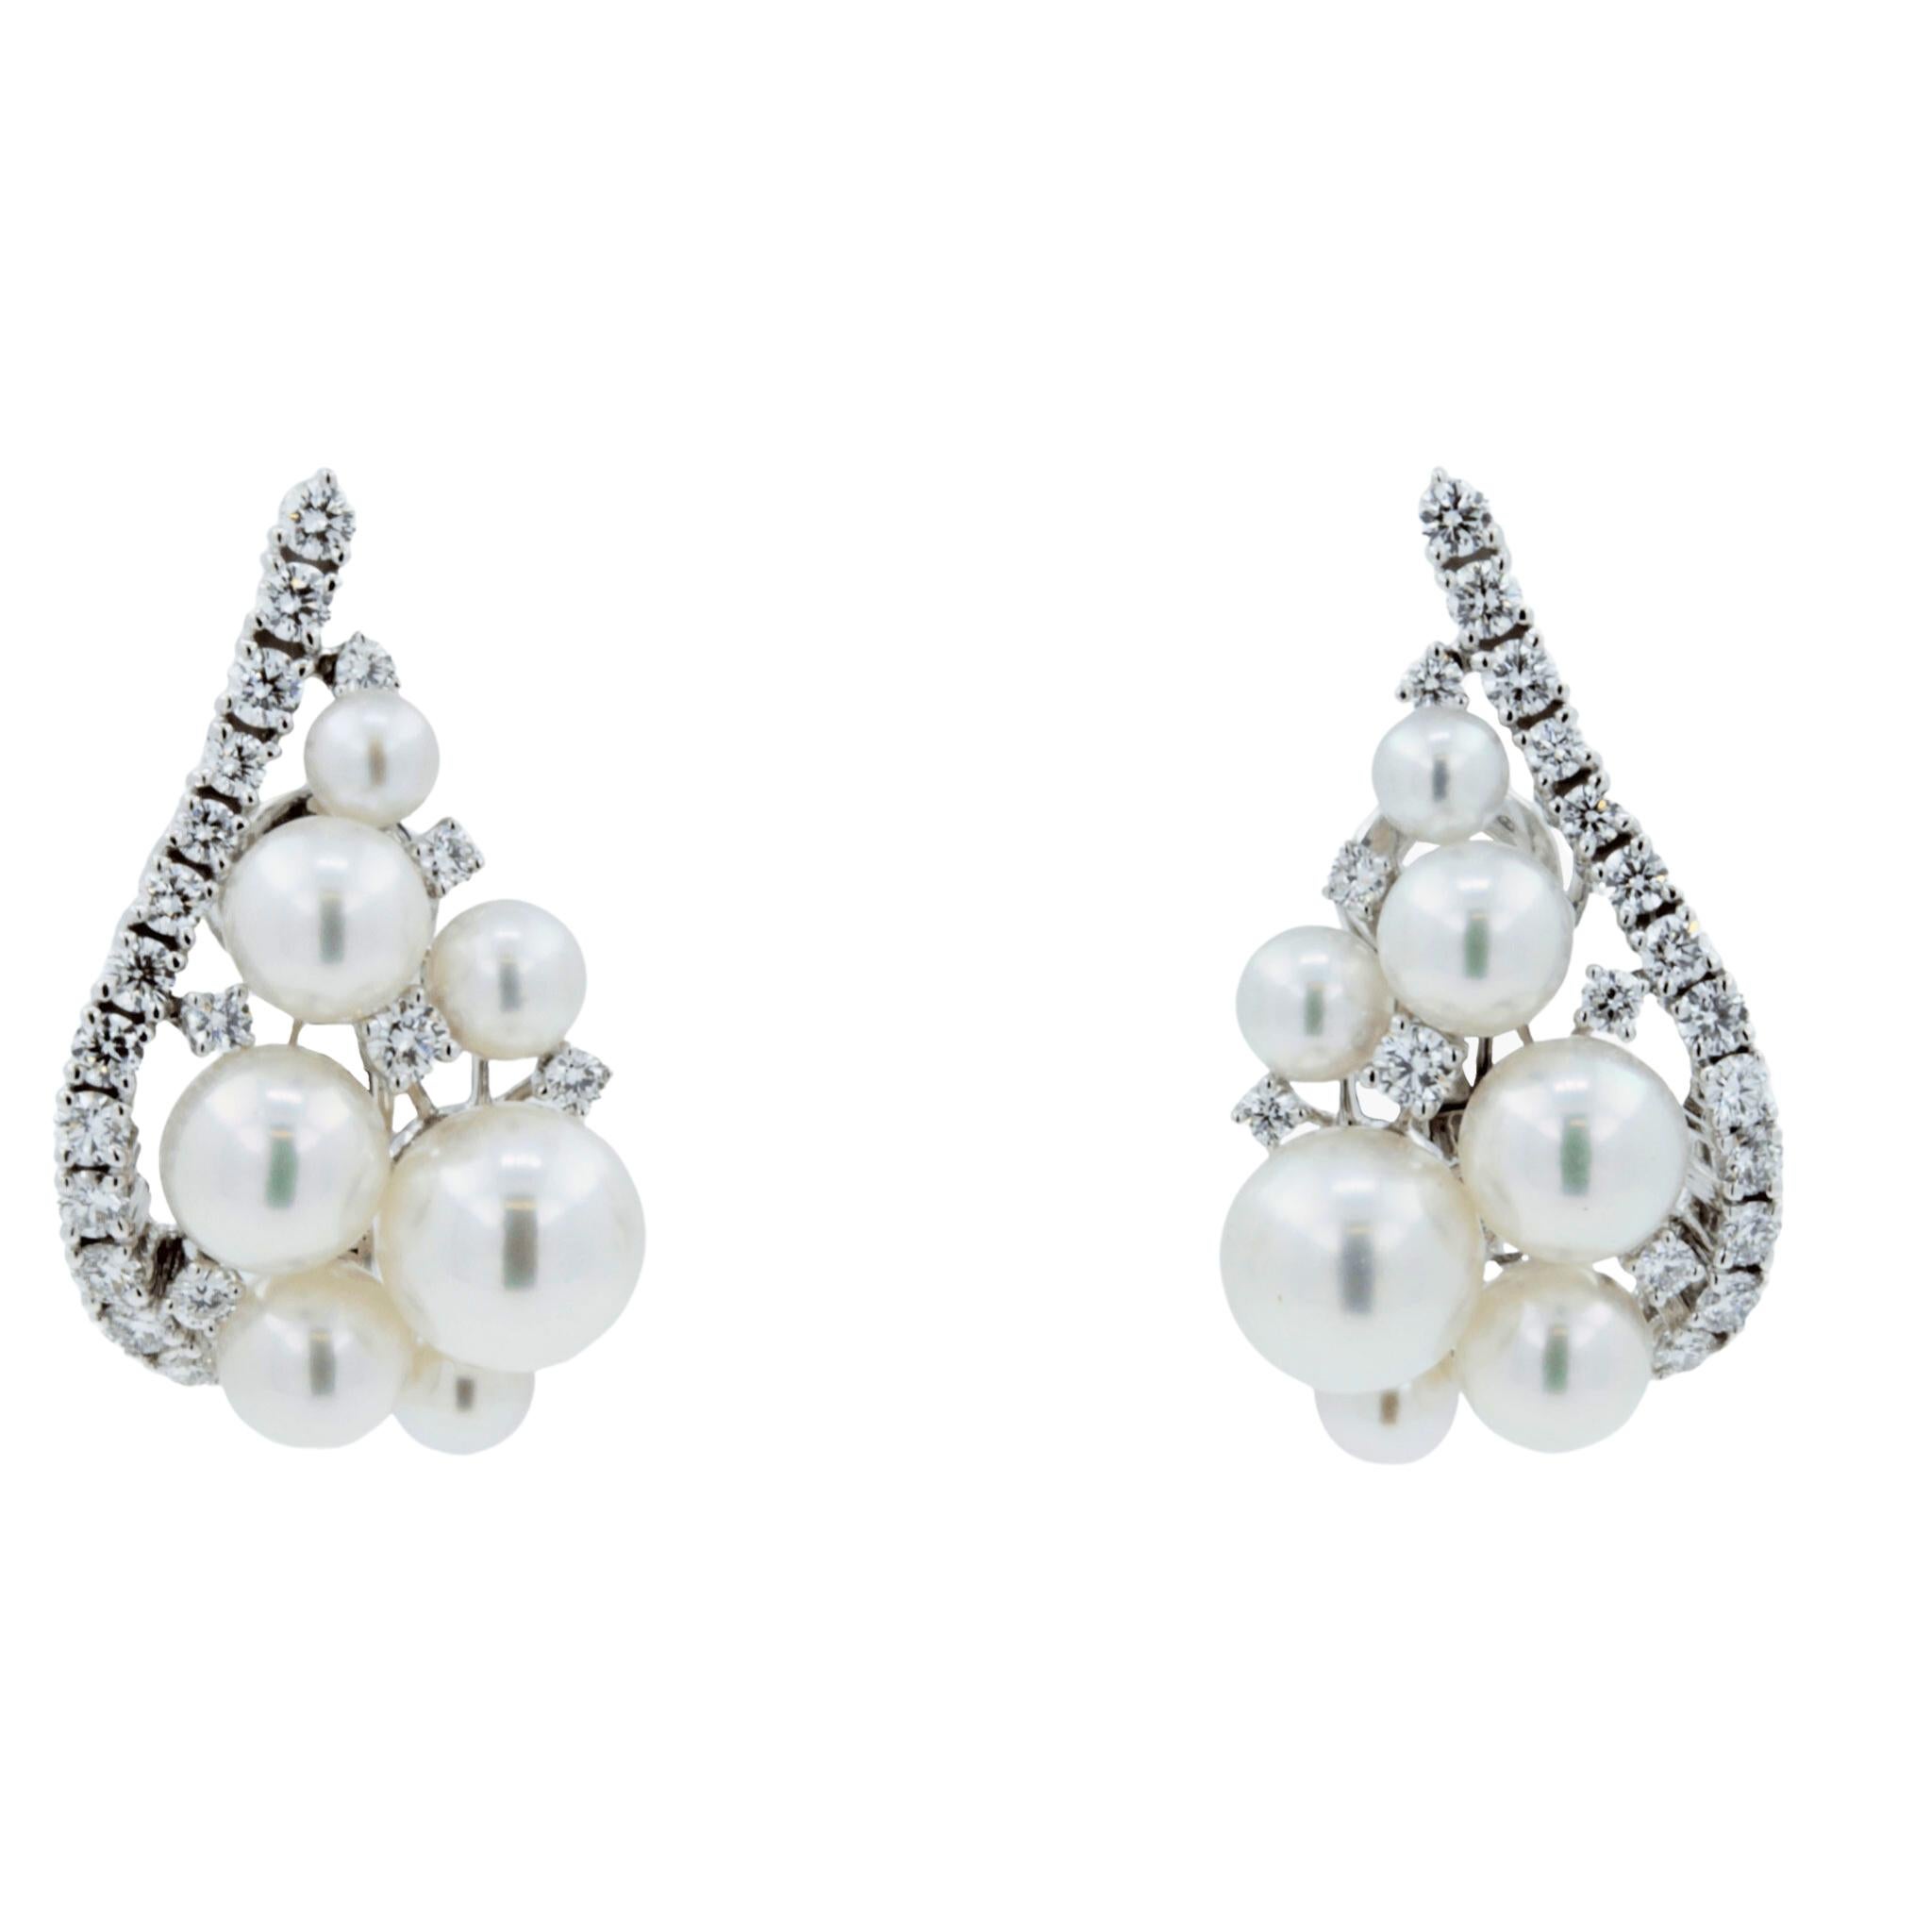 Akoya Pearl & Diamond Grape Bunch Earrings

This collection of rich and tempting orbs comes to life with Akoya pearls bunched like sweet, luscious grapes thar wrap around a neck or finger and hang delicated from an ear.  The subtle, organic